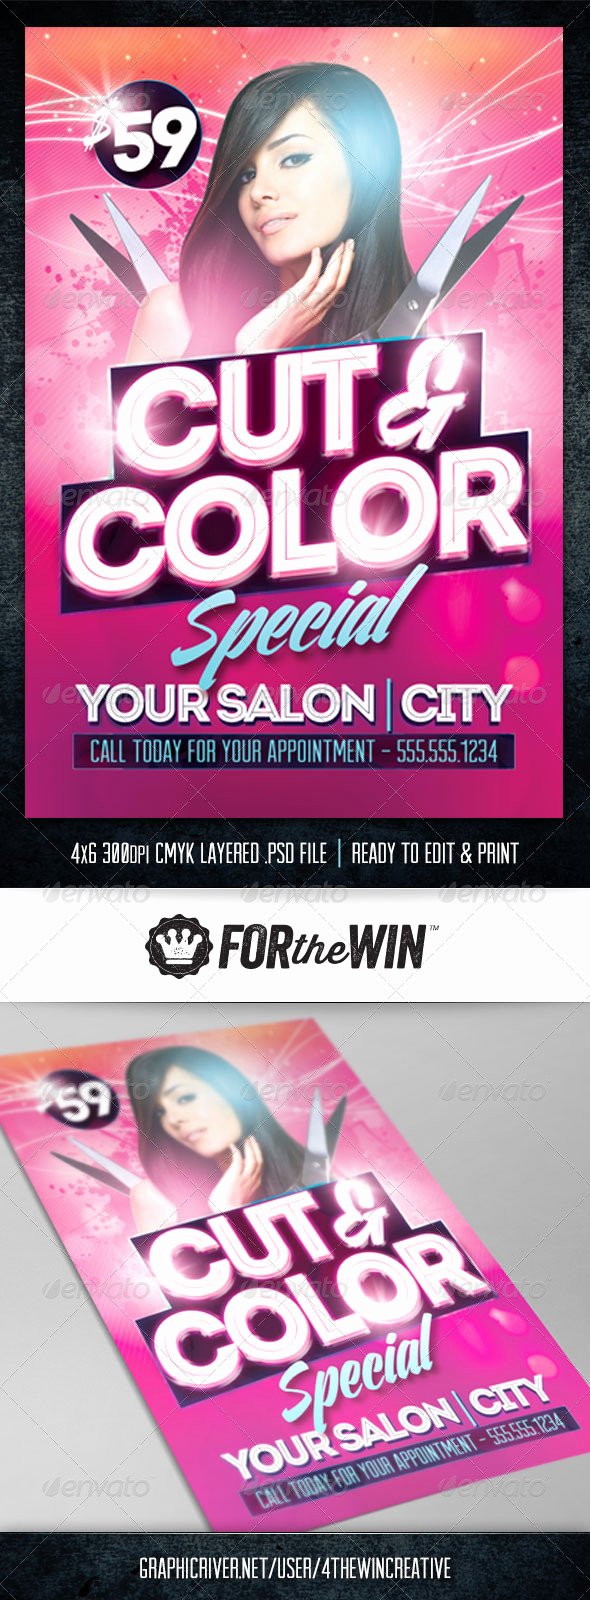 Hair Flyers Free Template Lovely Hair Salon Flyer Template by 4thewincreative